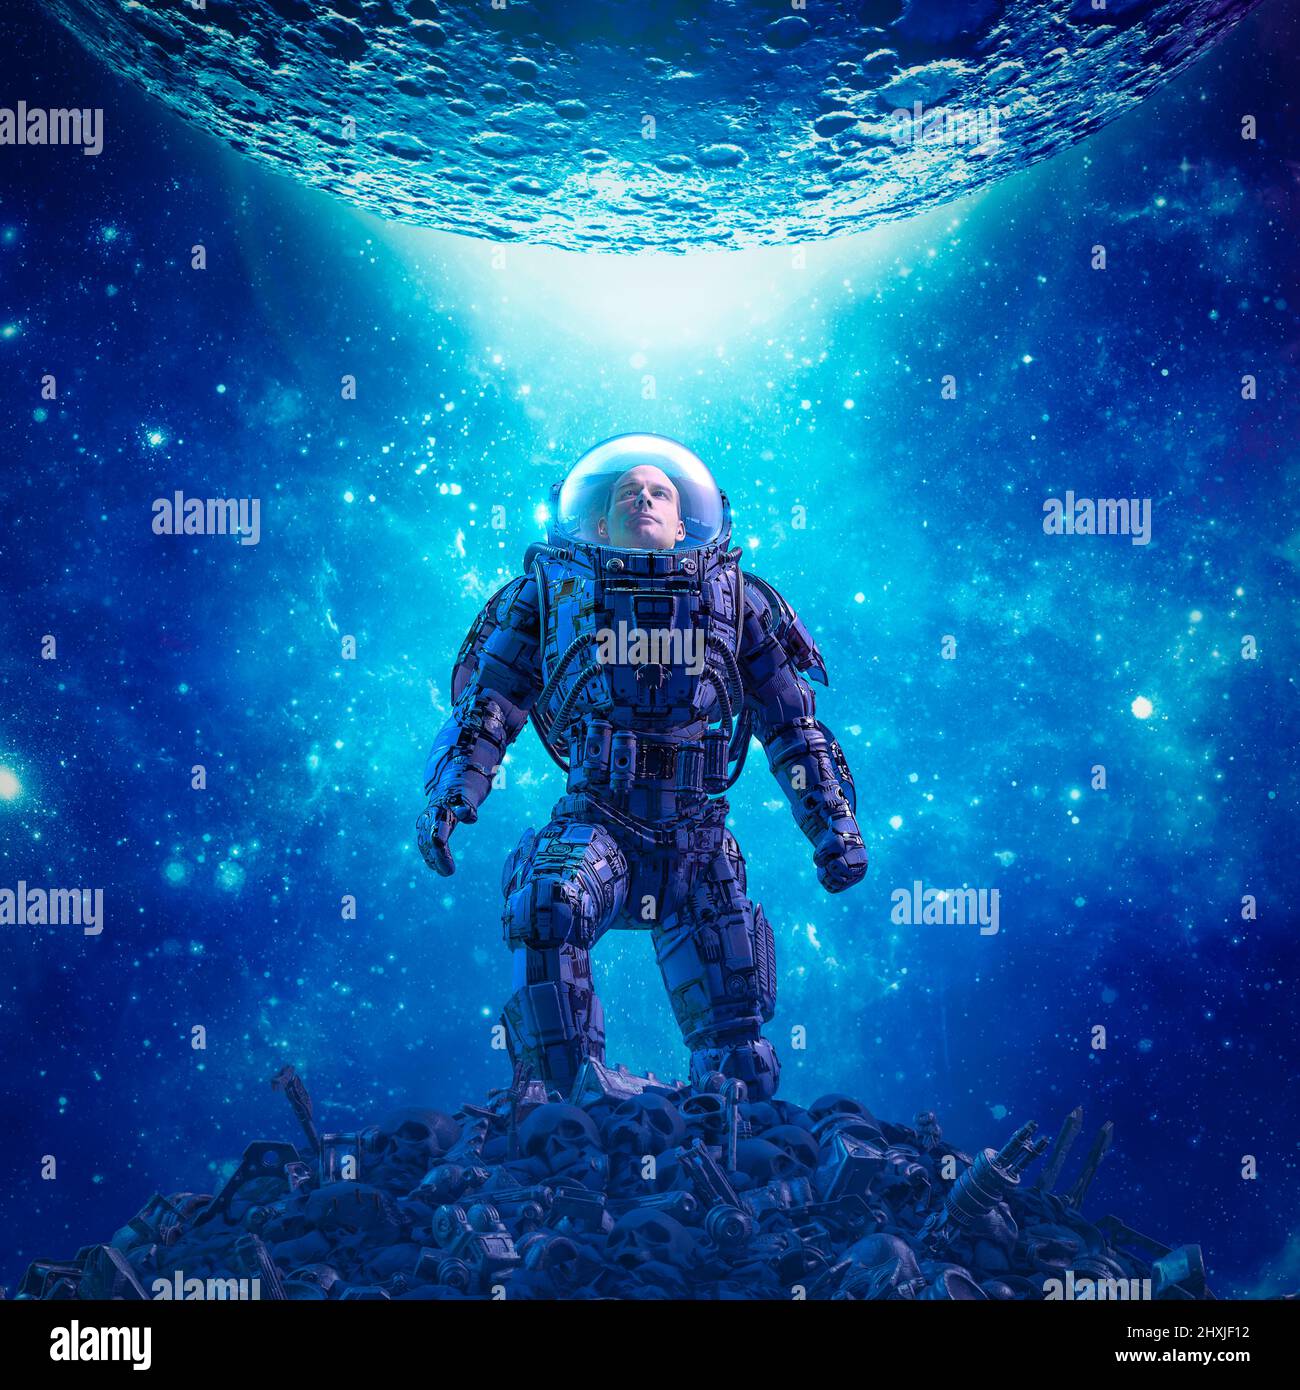 Beneath the moonrise - 3D illustration of science fiction scene showing astronaut viewing rising moon in outer space Stock Photo